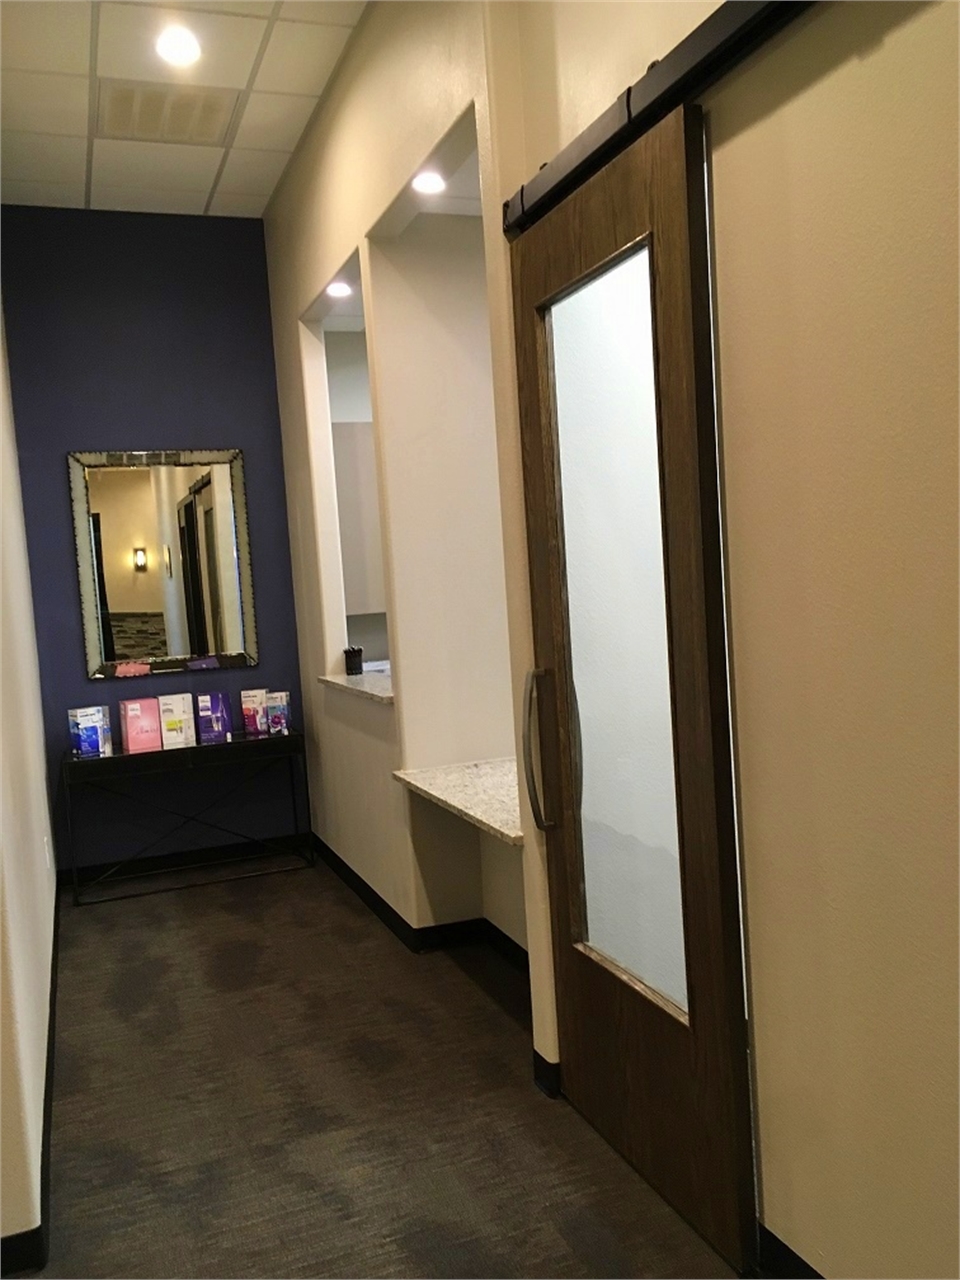 Front desk at our cosmetic dentistry office located just a few paces away from Spring Pointe Apartme